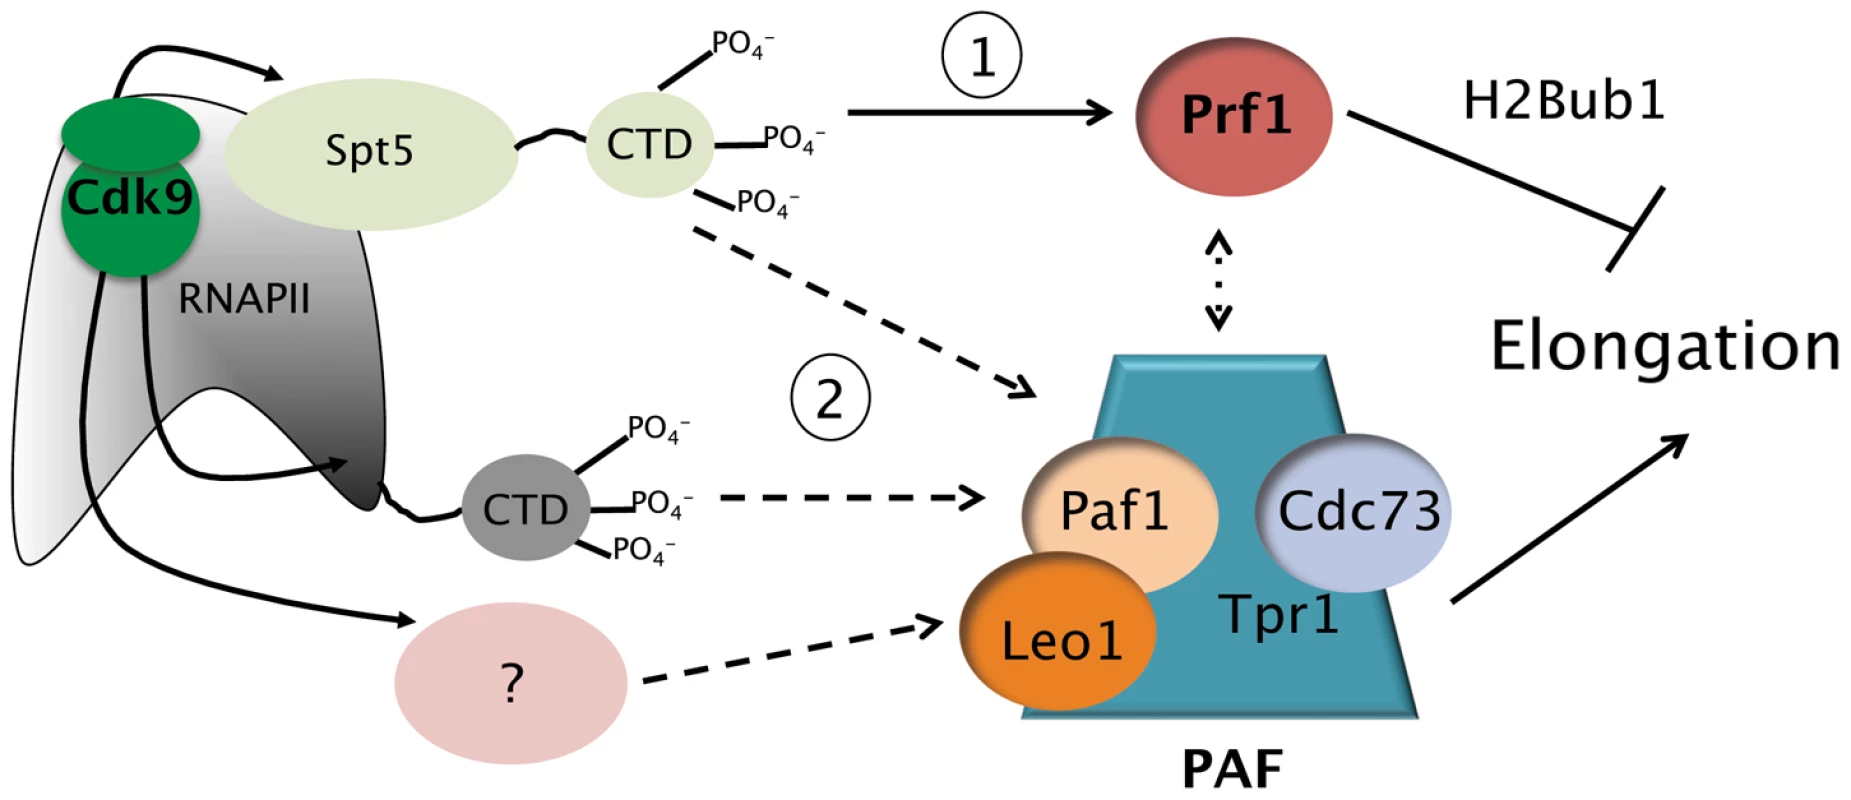 Model depicting the roles of the Prf1/Rtf1 and PAF pathways in RNAPII elongation.